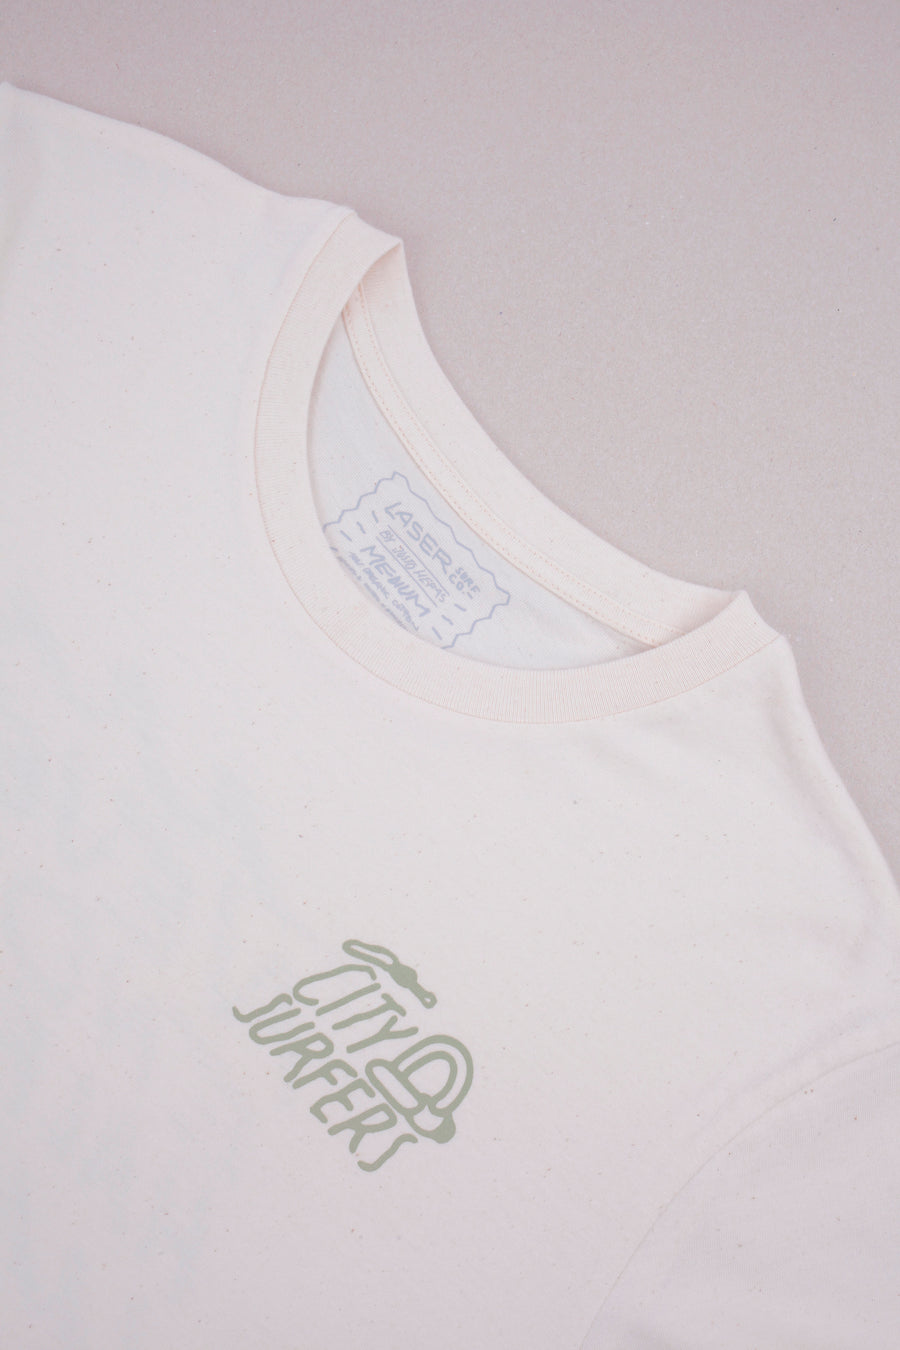 CITY SURFERS TEE NATURAL